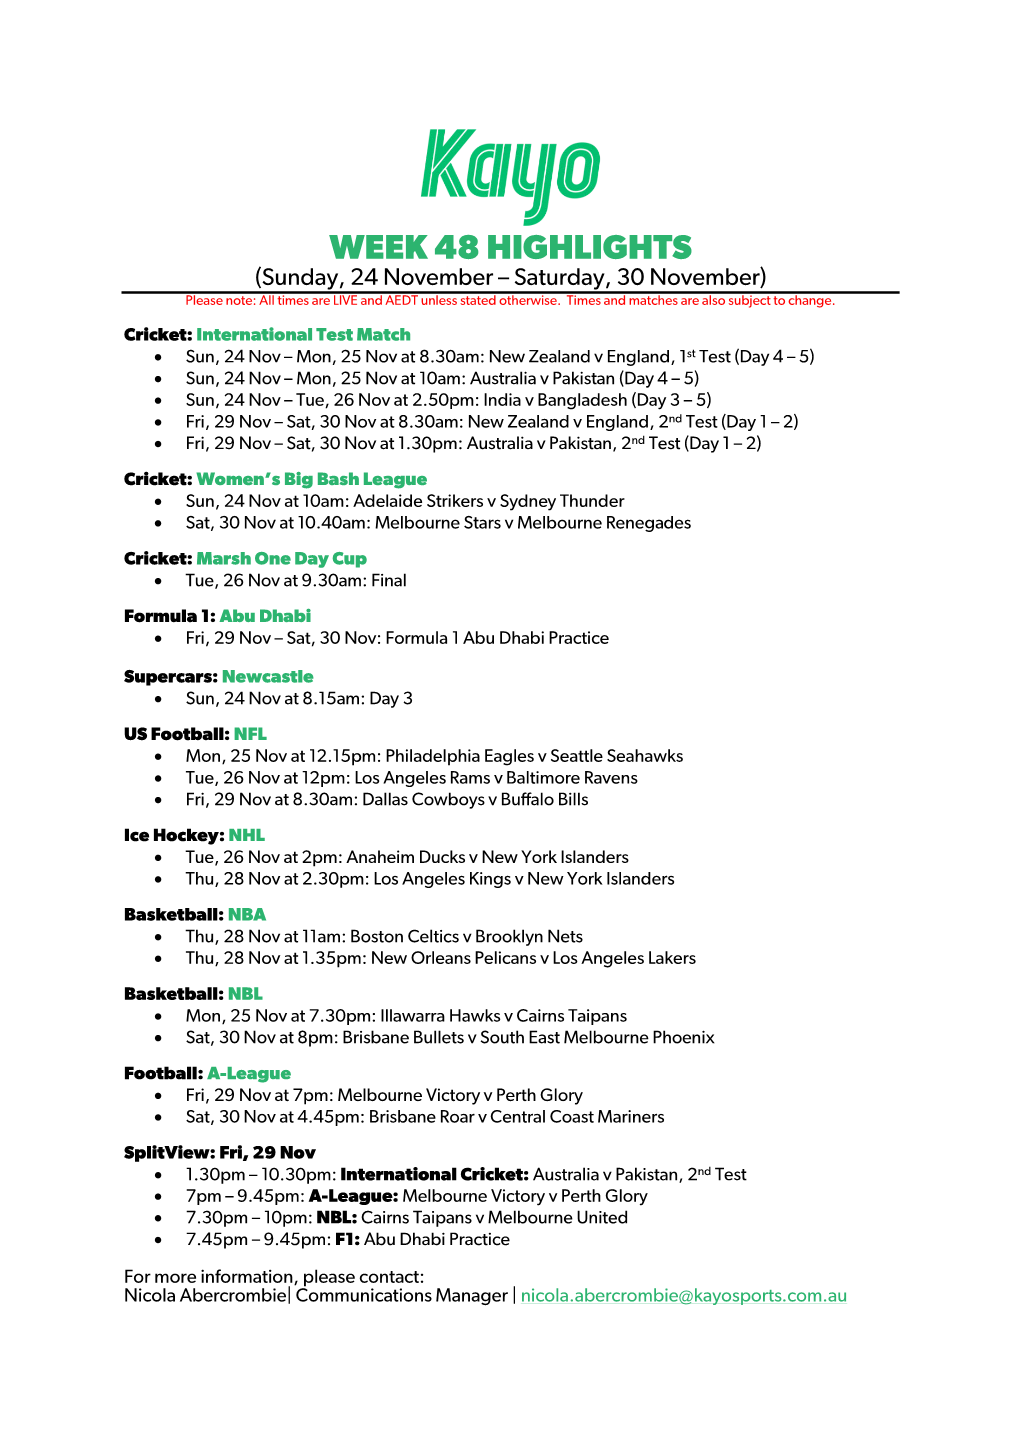 WEEK 48 HIGHLIGHTS (Sunday, 24 November – Saturday, 30 November) Please Note: All Times Are LIVE and AEDT Unless Stated Otherwise